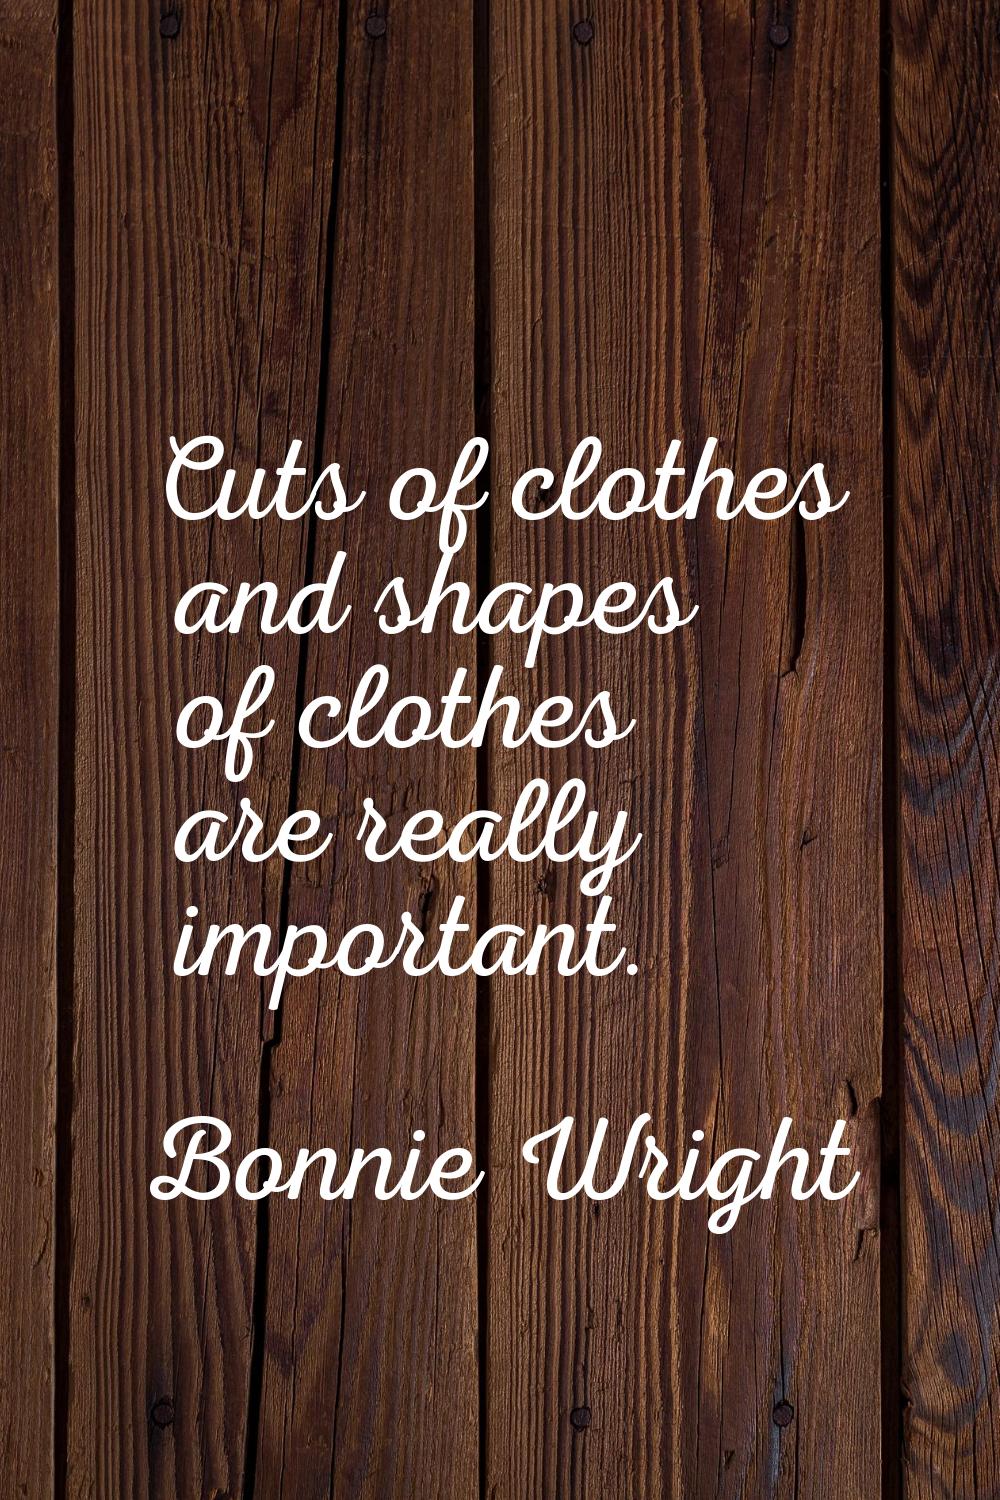 Cuts of clothes and shapes of clothes are really important.